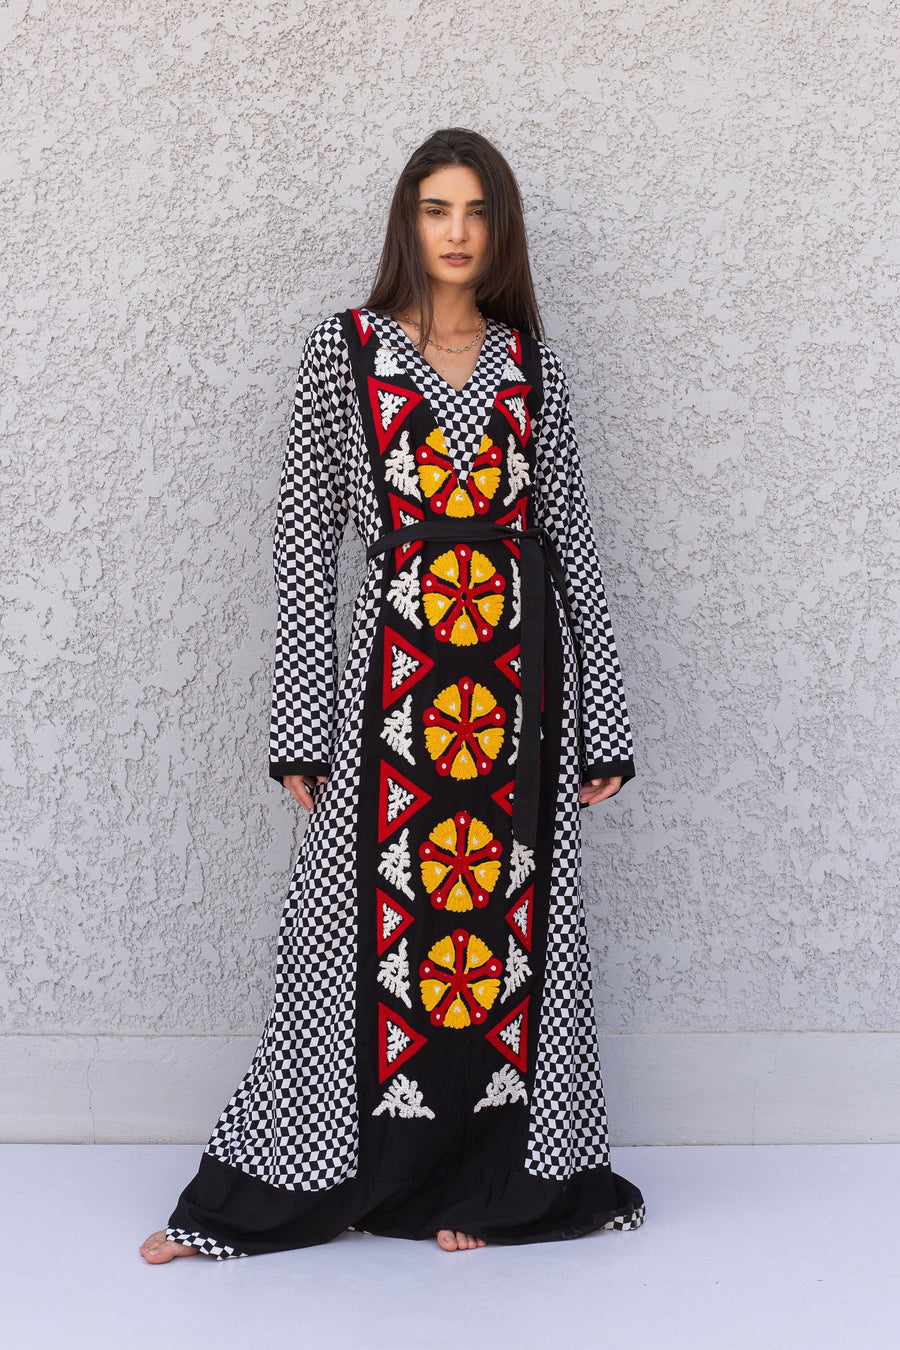 Beautiful Checkered black embroidered Caftan, cotton caftans for women, Kaftans, embroidered Caftan, Caftan maxi dress, Caftans for women